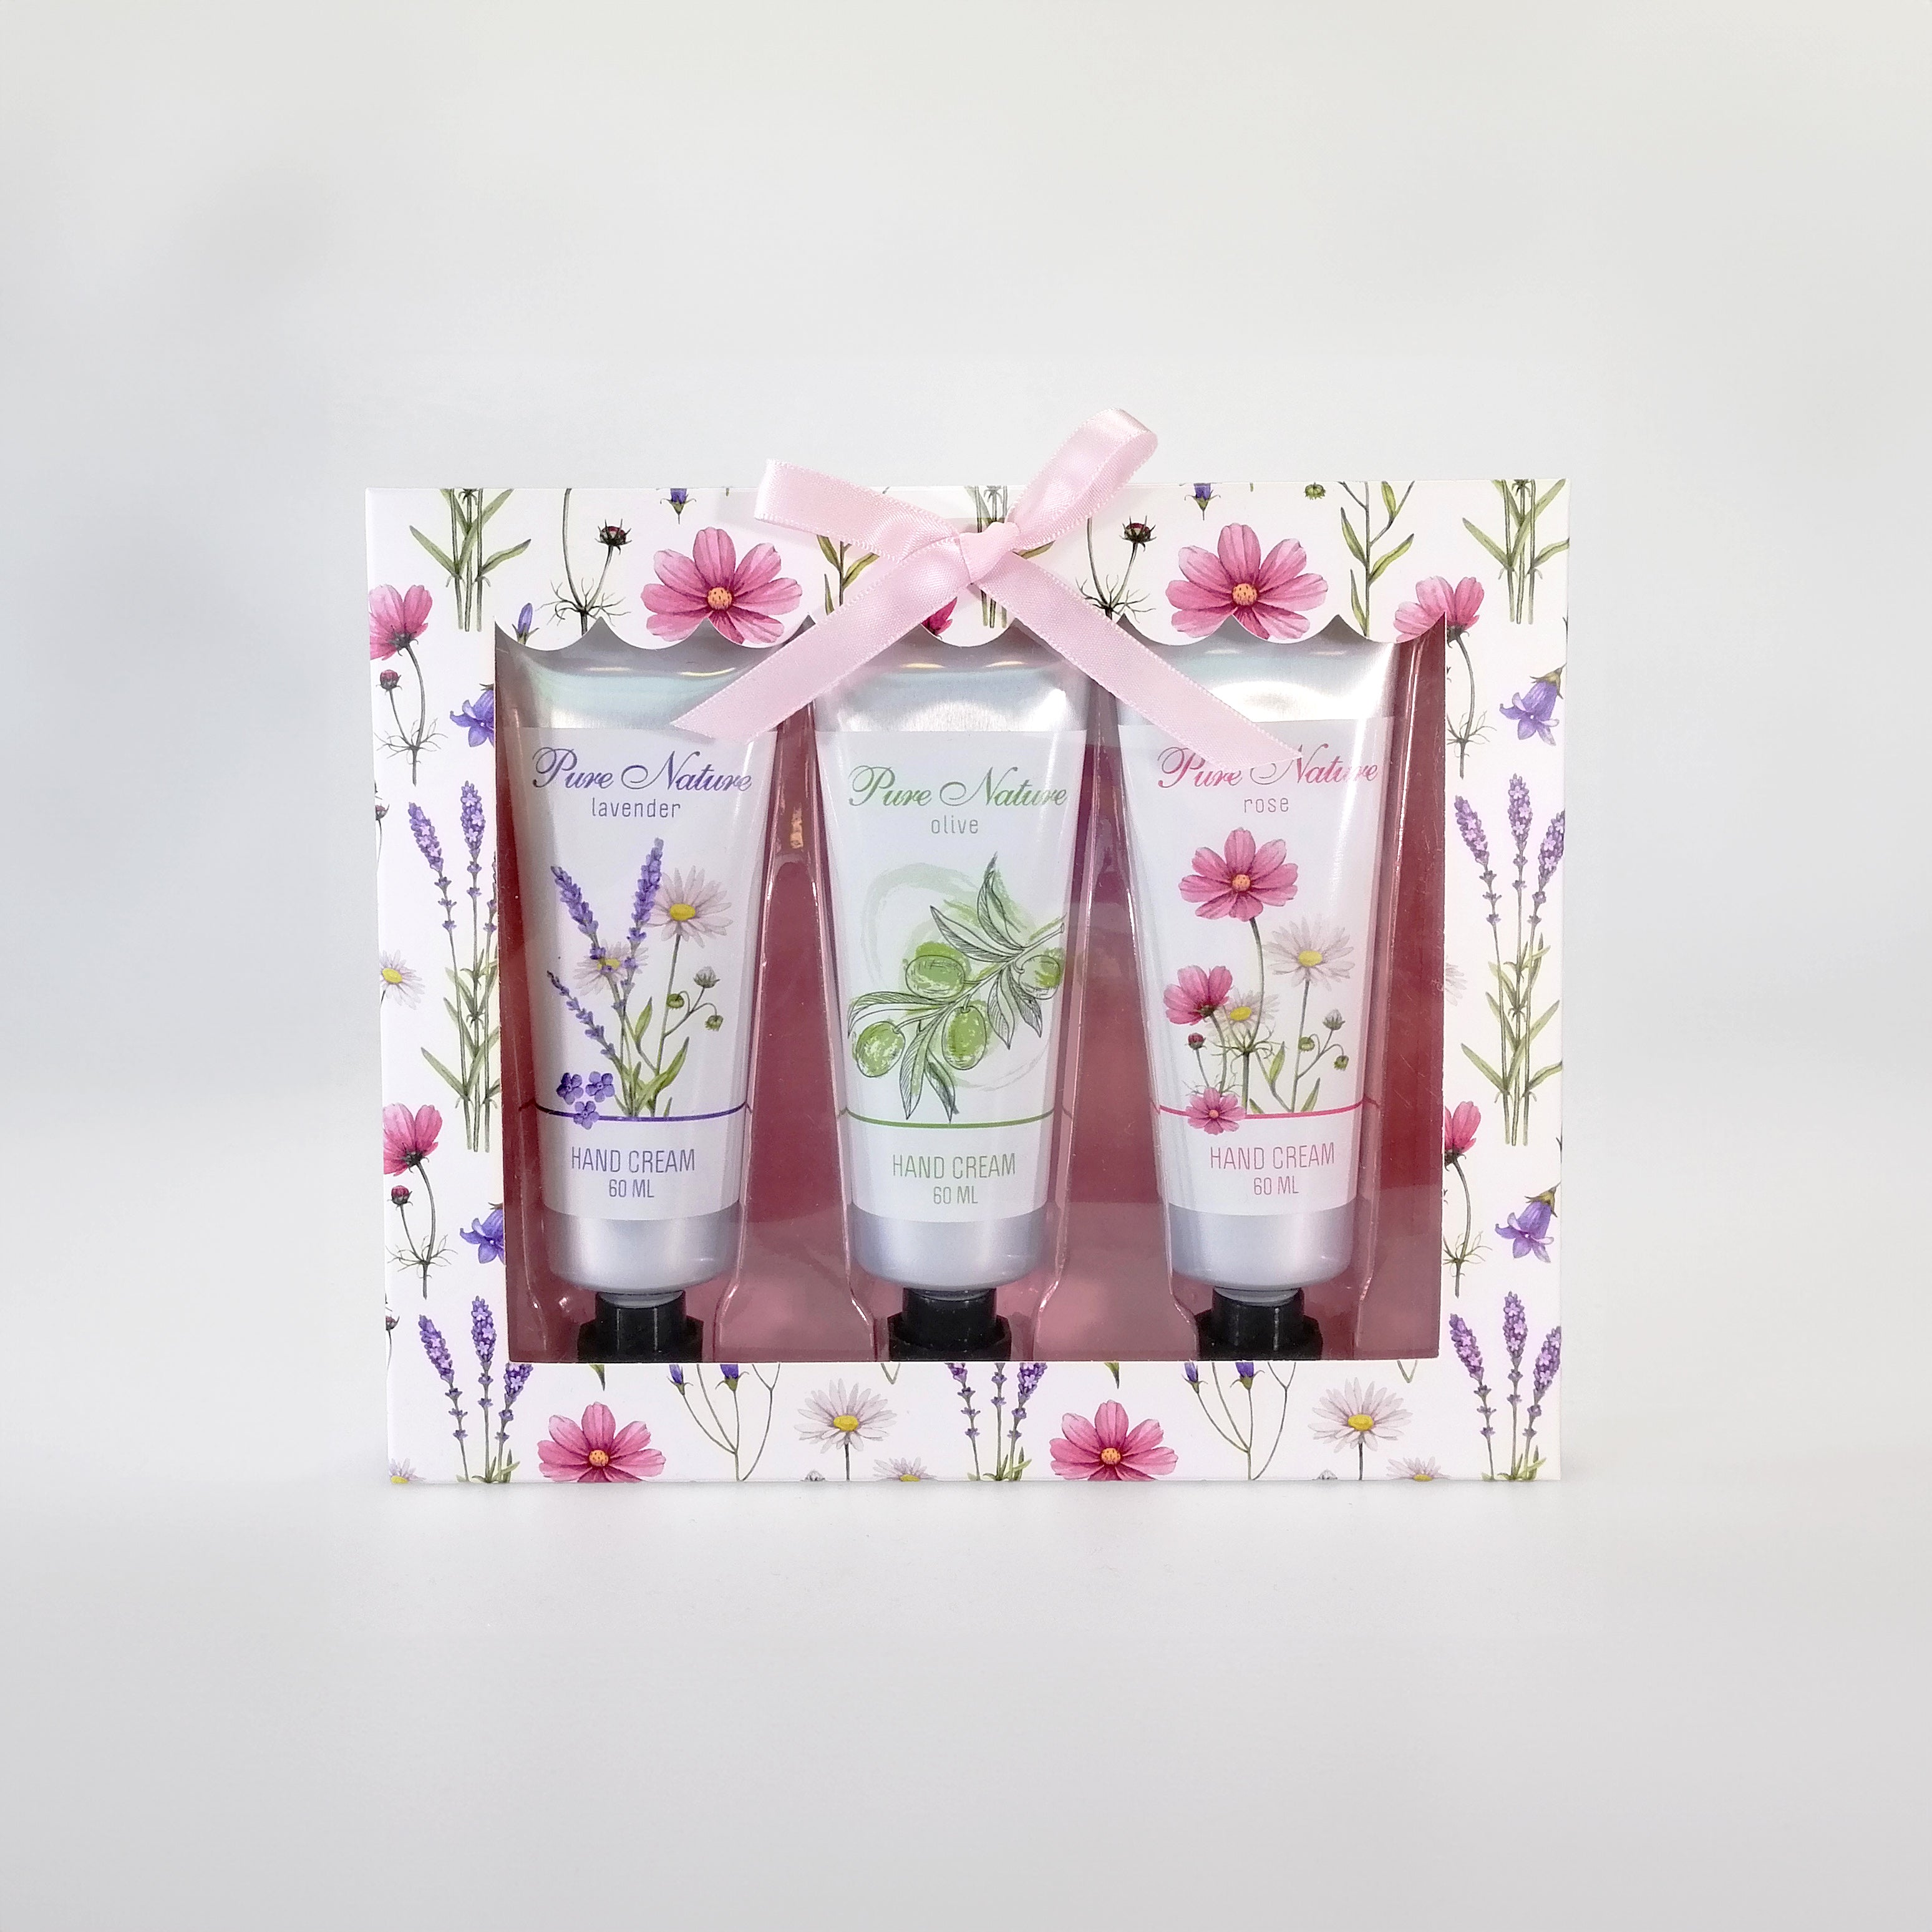 Pure Nature - Floral Hand Cream Gift Set - Lavender, Olive, and Rose